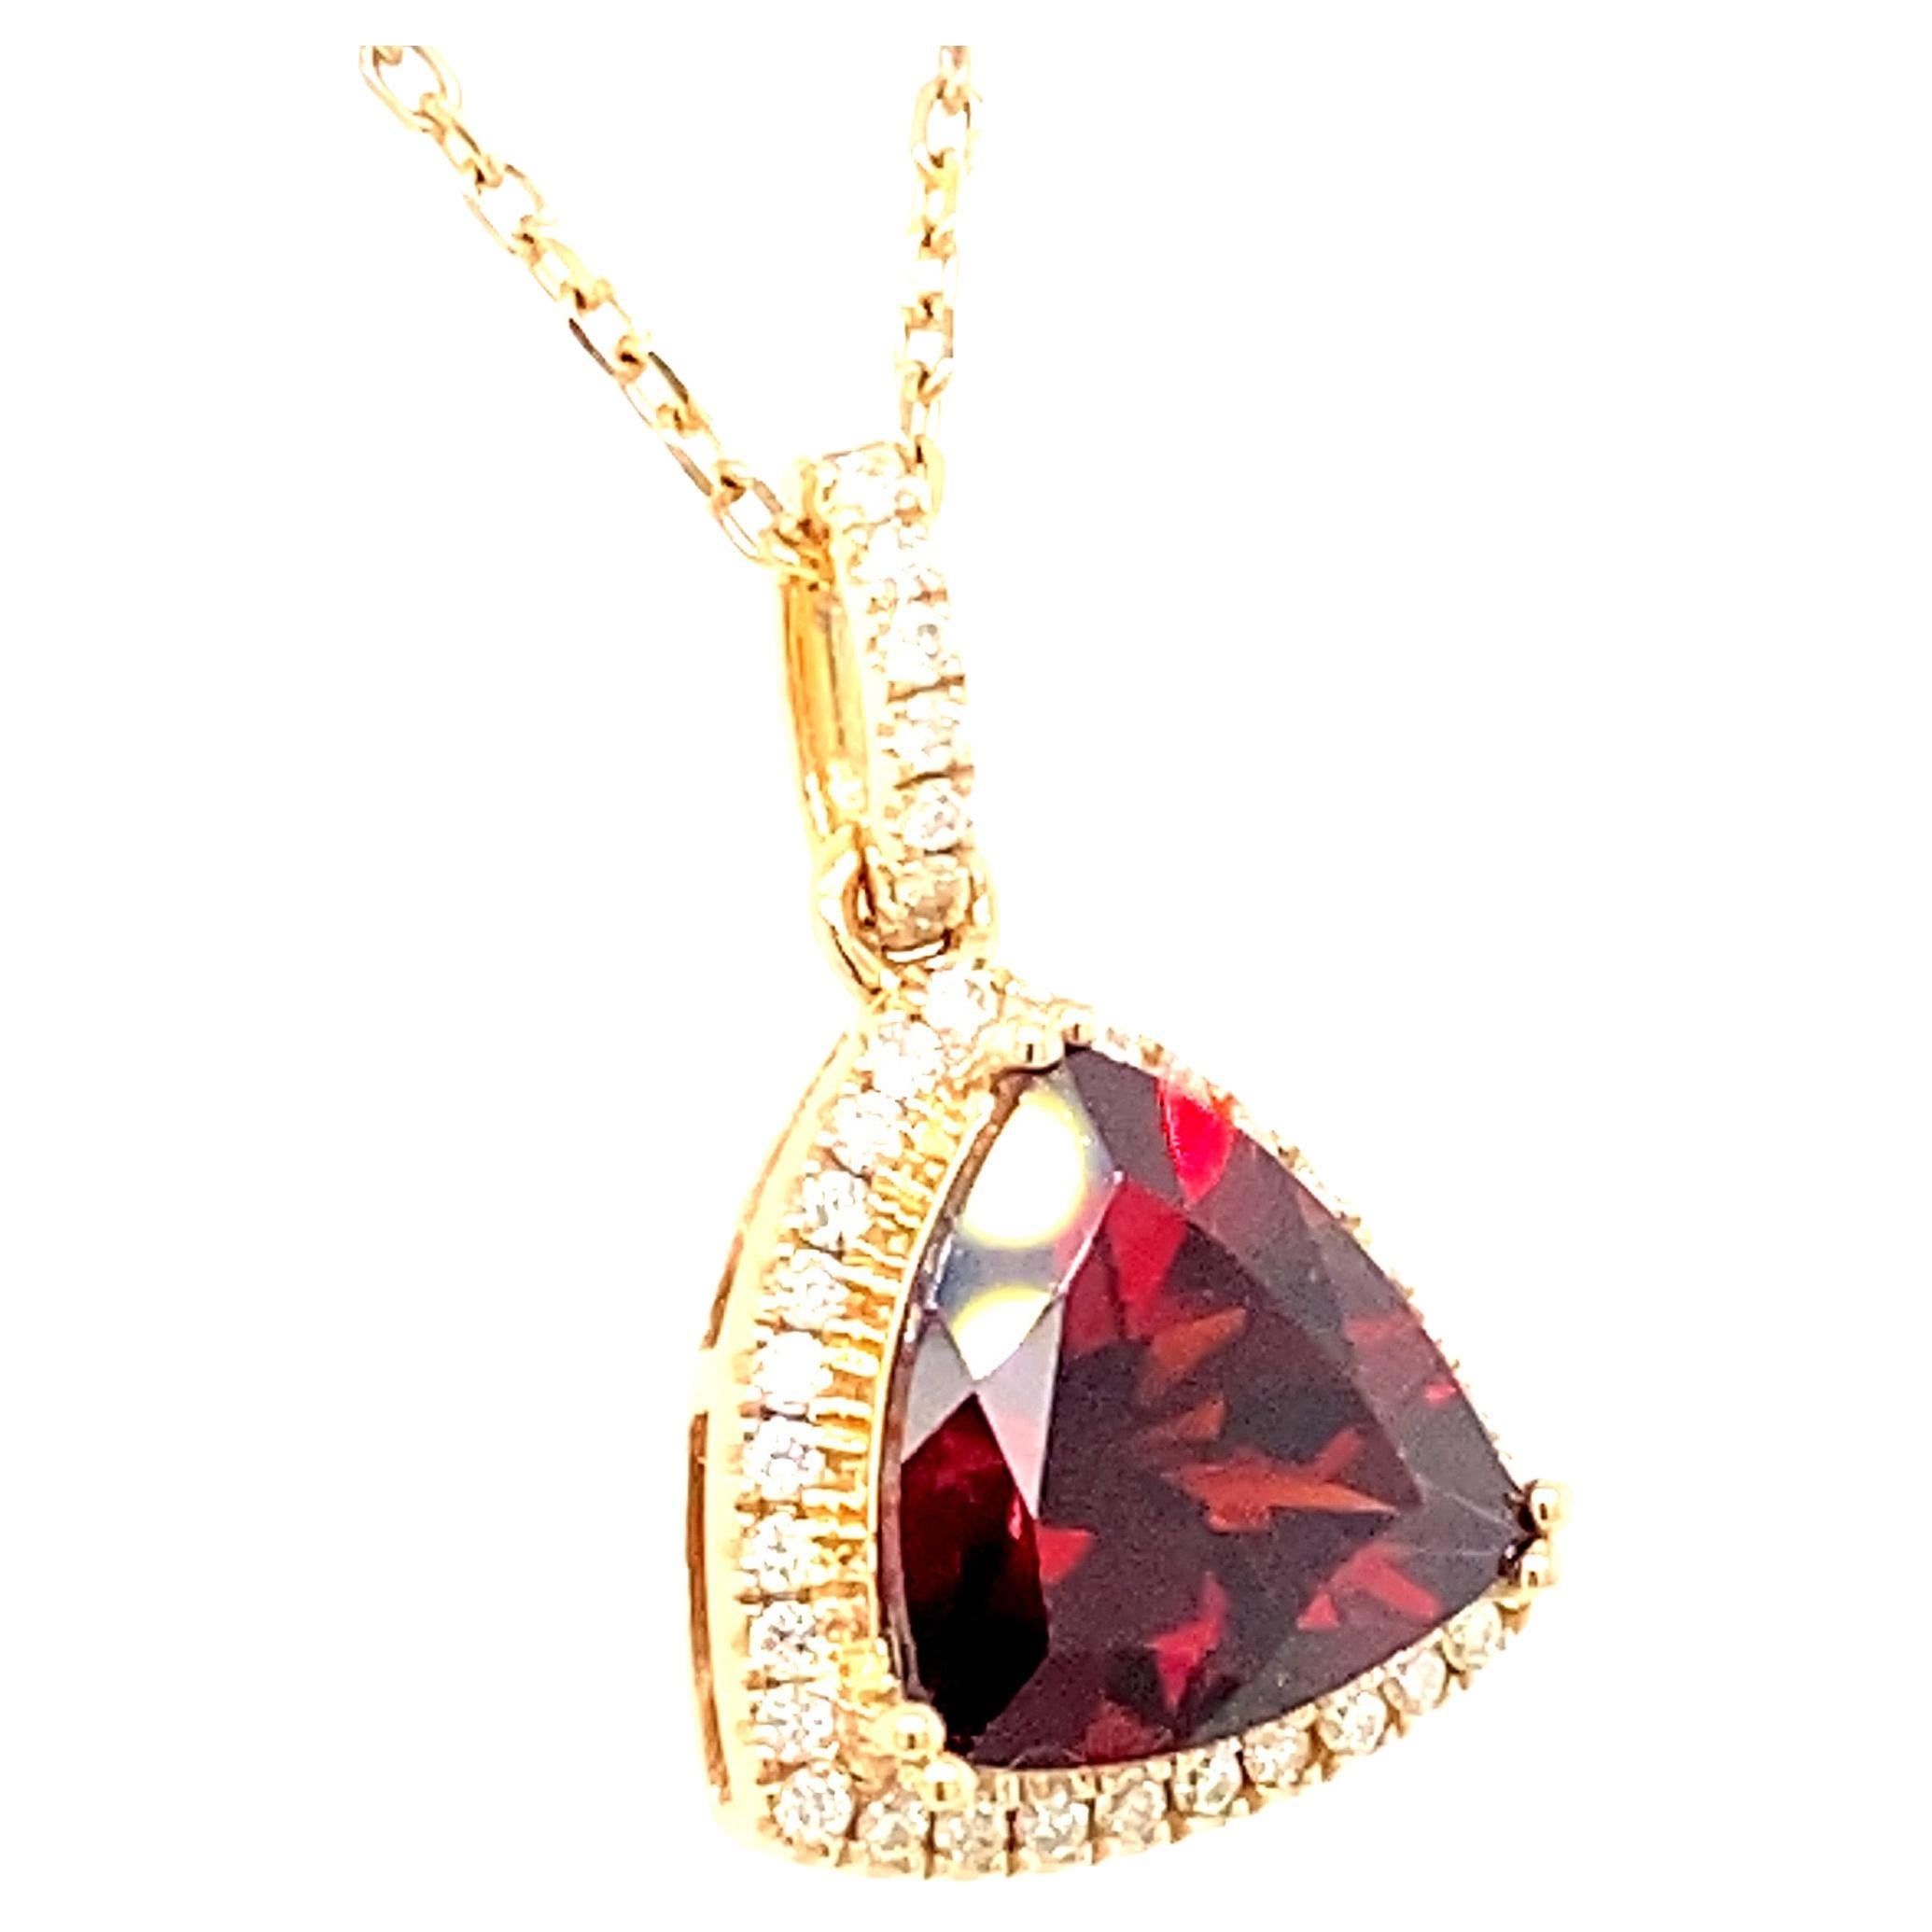 Trillion shape garnet (approximately 6.5ct) is framed by halo of white diamond. Set in 14K yellow gold and has a decorative under-gallery. Birth stone of January, this simple yet elegant pendant is suitable for everyday wear. 
* Chain not included